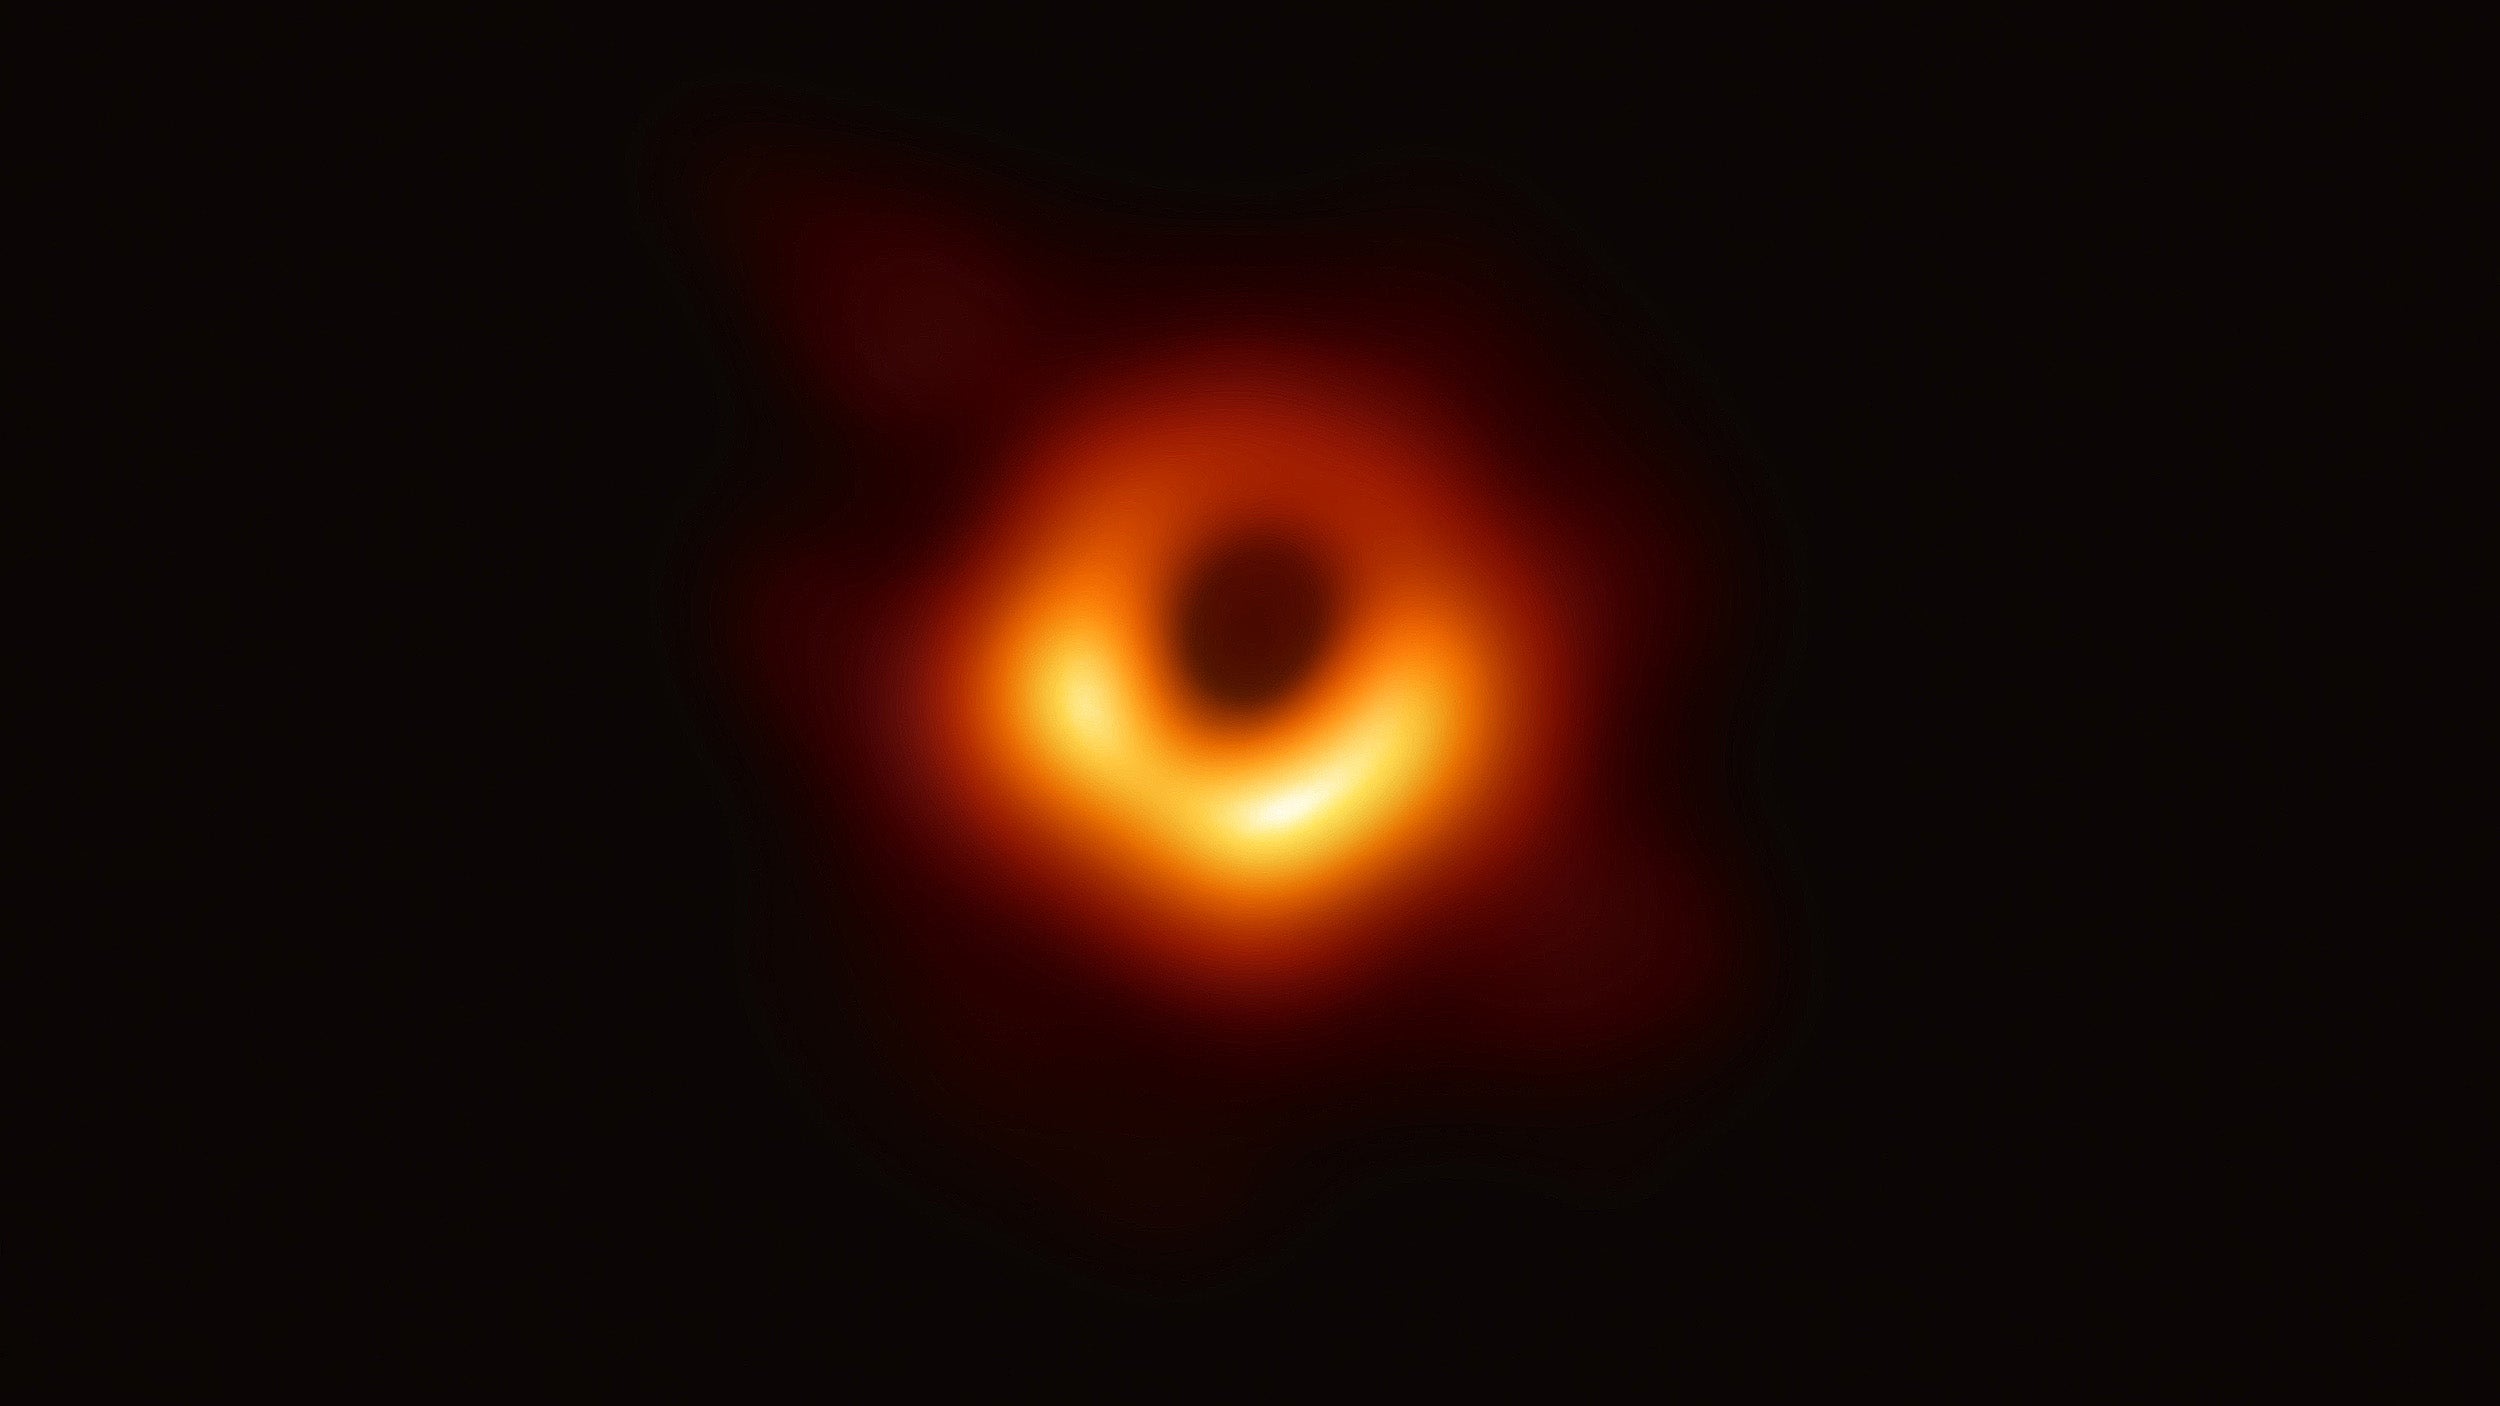 A pic of a black hole